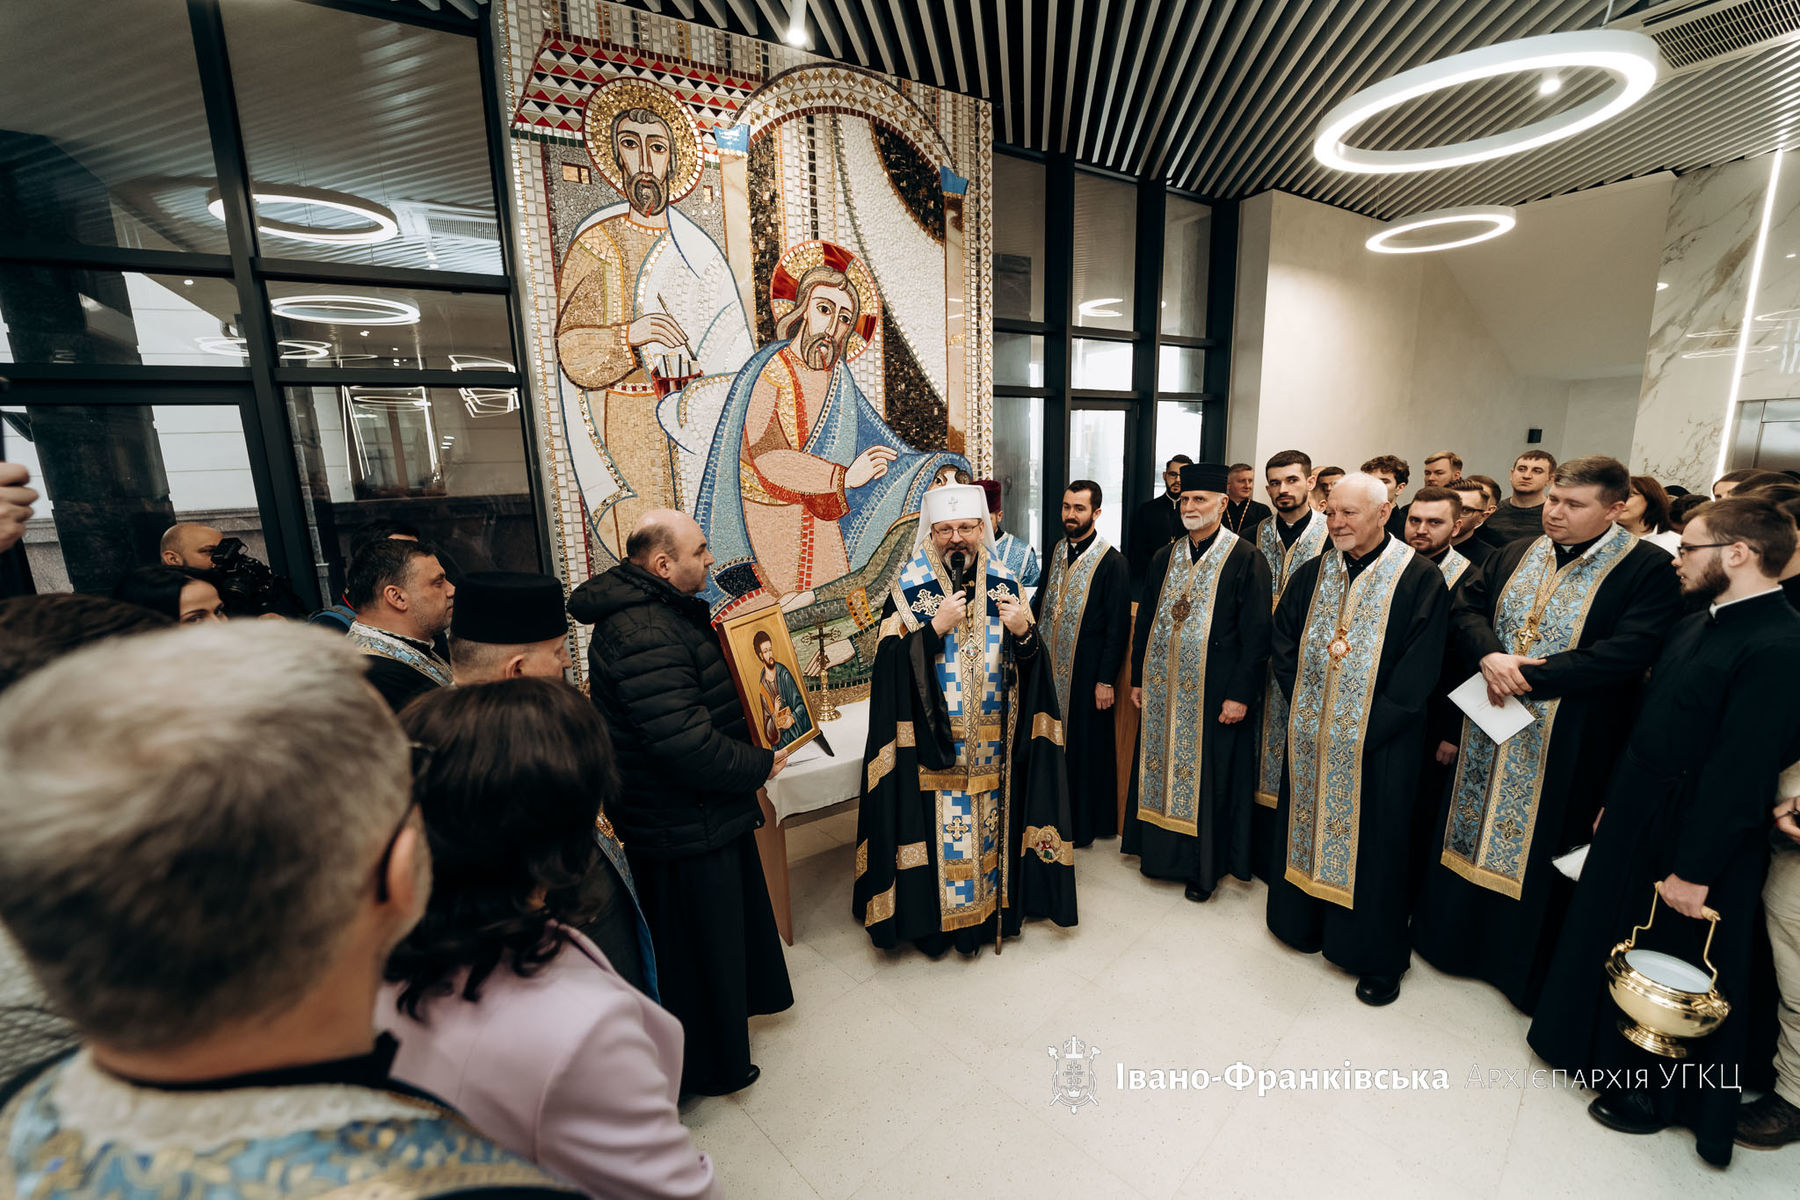 His Beatitude Sviatoslav consecrates the newly built premises of St. Luke’s Clinic in Ivano-Frankivsk